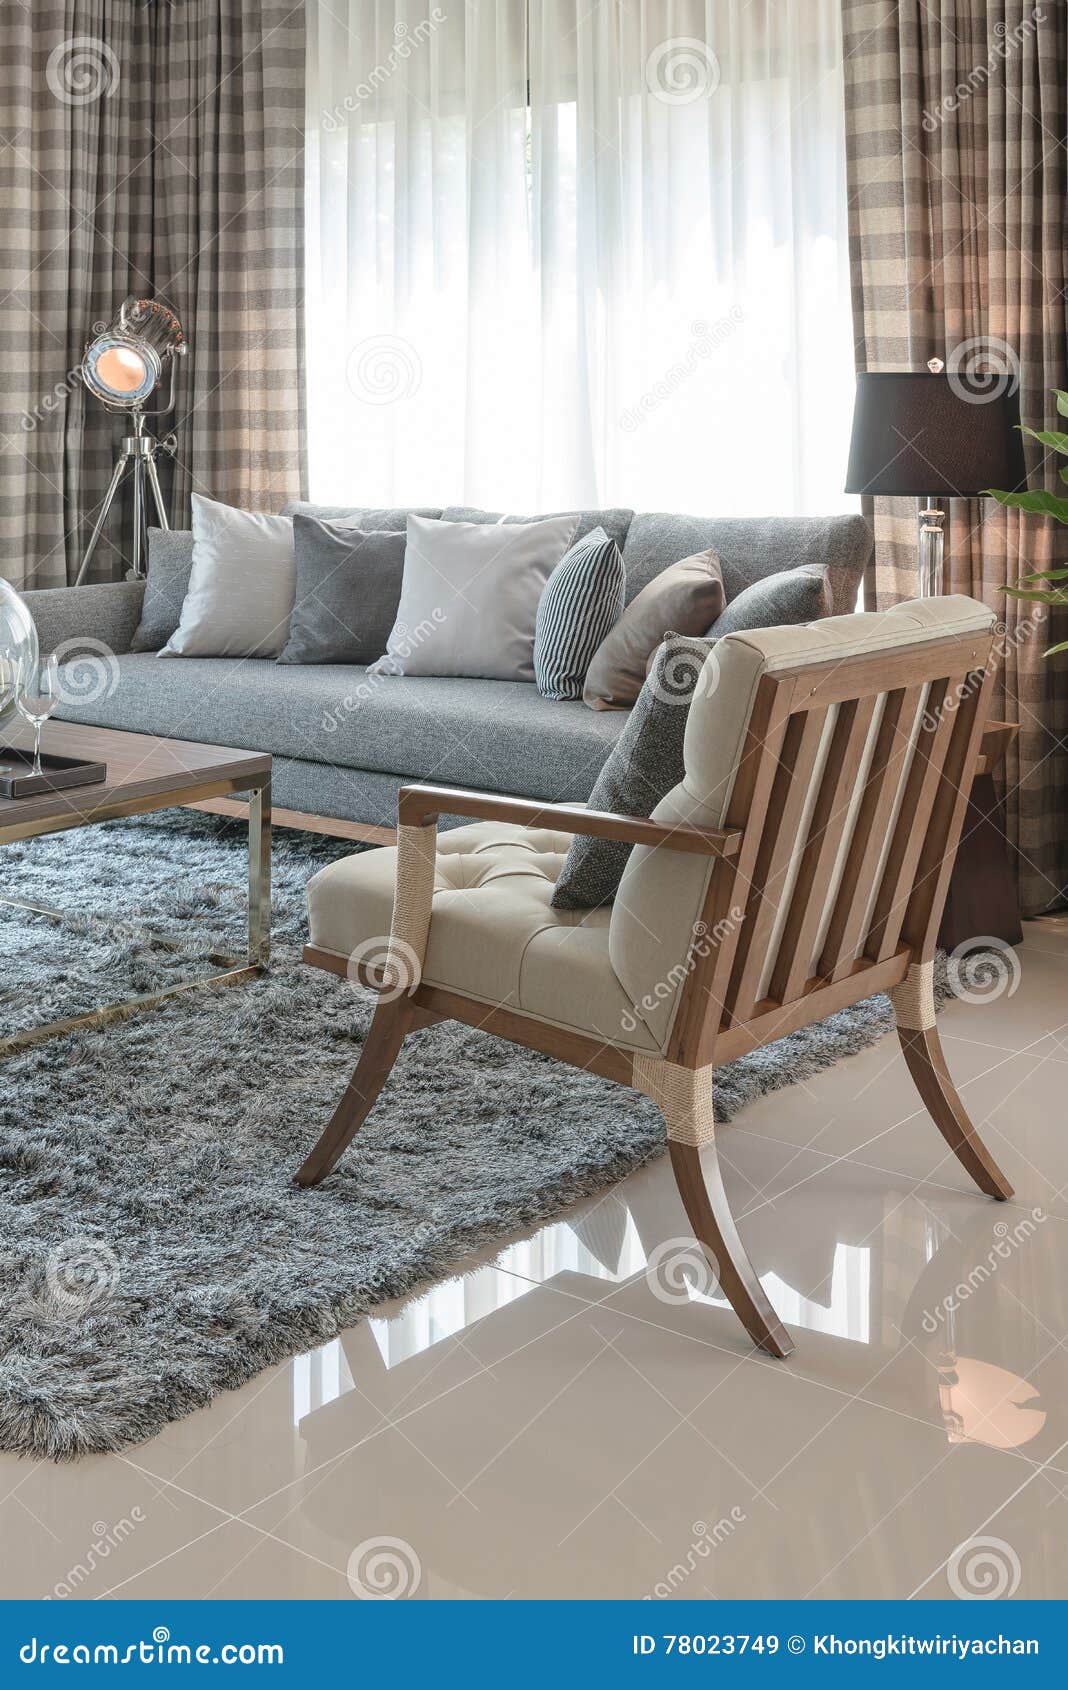 Modern Living Room With Wooden Chair On Carpet Stock Image Image Of Furniture Modern 78023749